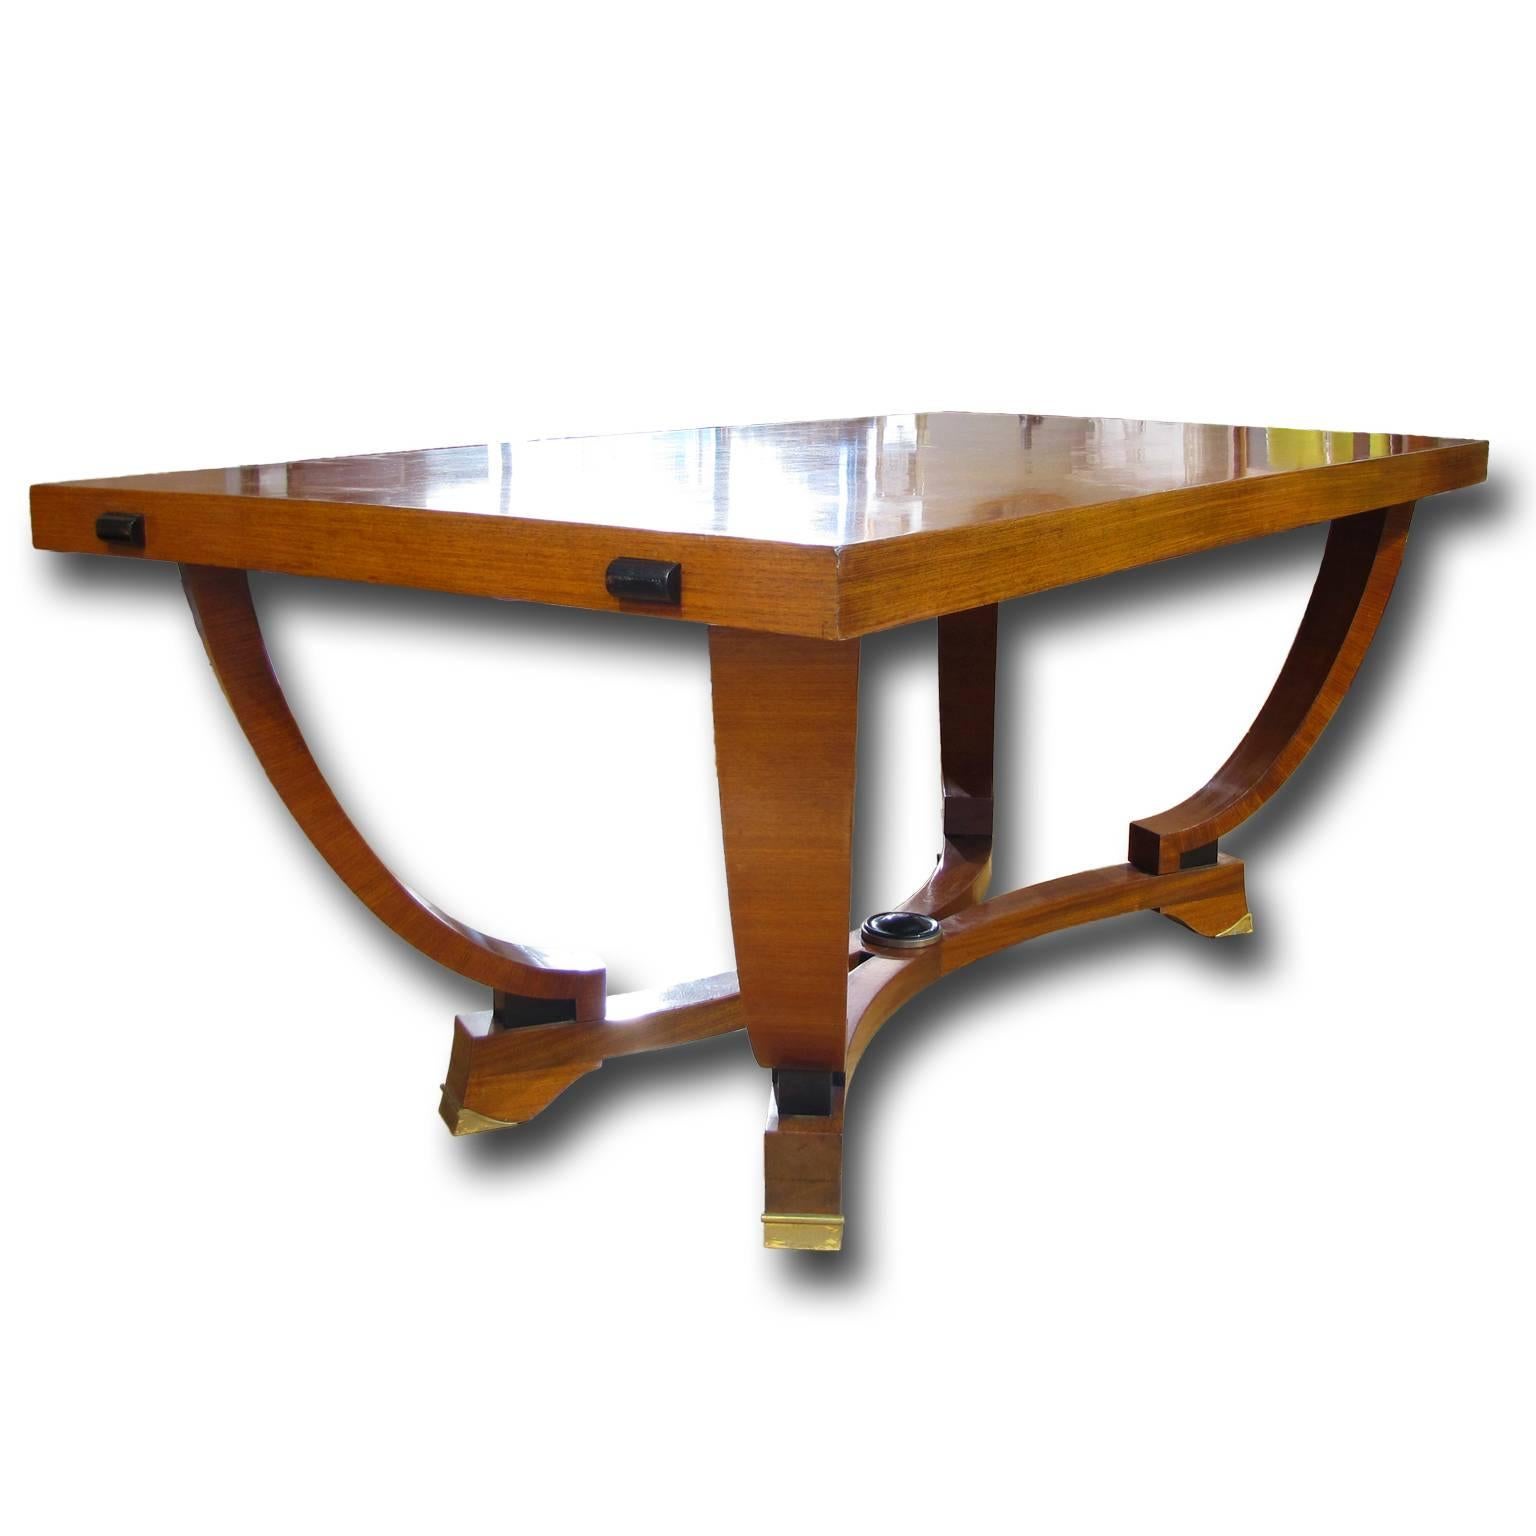 An Italian Art Deco dining table with unique design from circa 1930, walnut veneered and polished with spirits.
The wide rectangular tabletop is displaying a beautiful walnut grain. It is supported by four curved legs that are connected to the wide